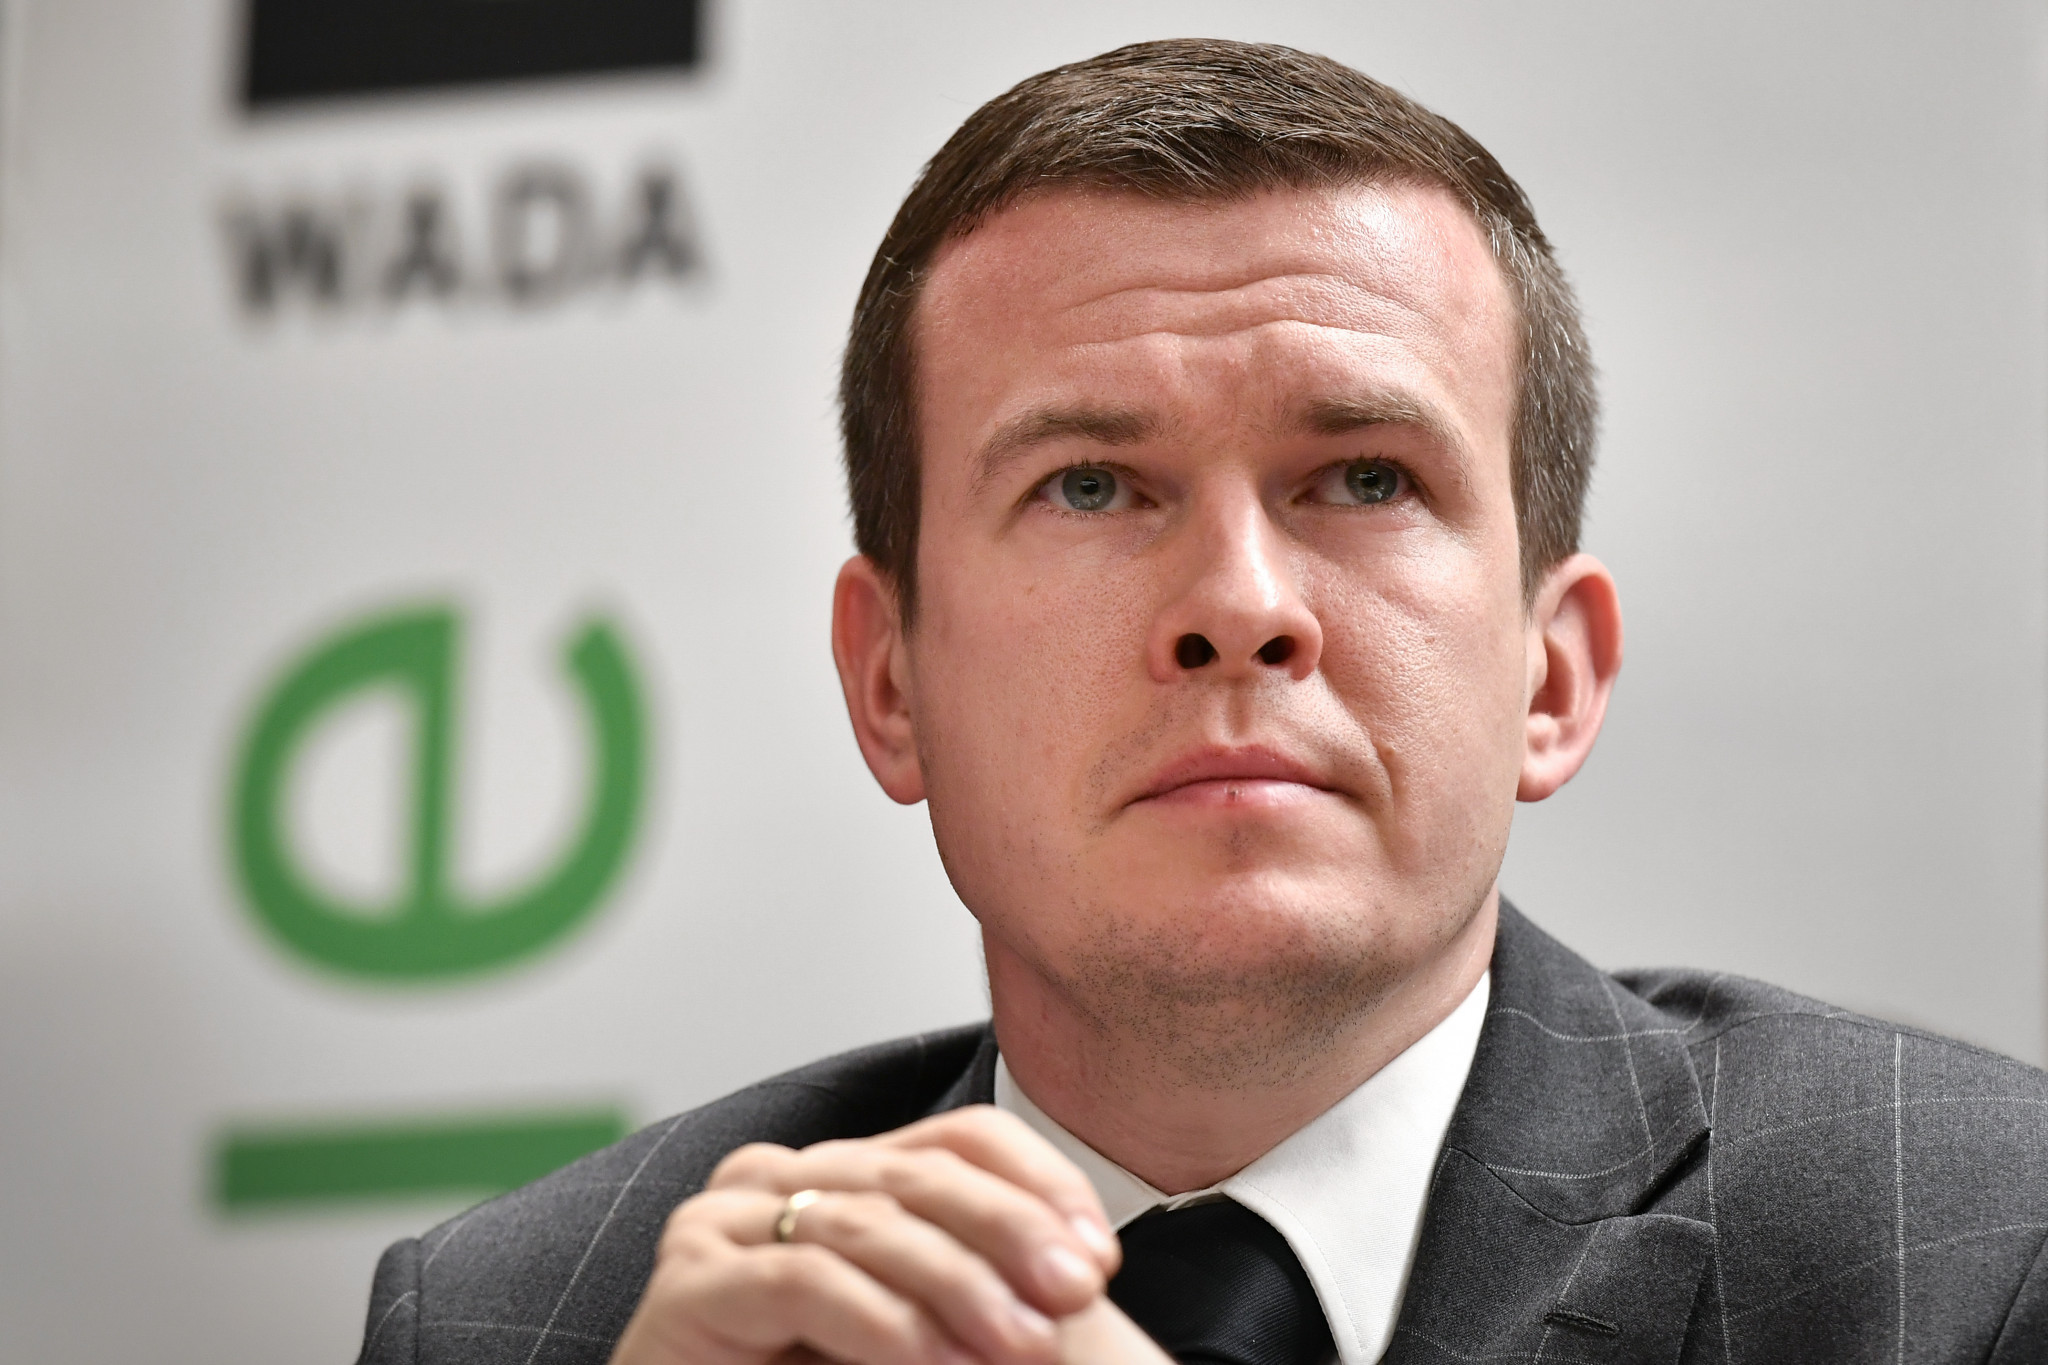 On the Athlete Council, WADA President Witold Bańka said the ultimate goal was to have 